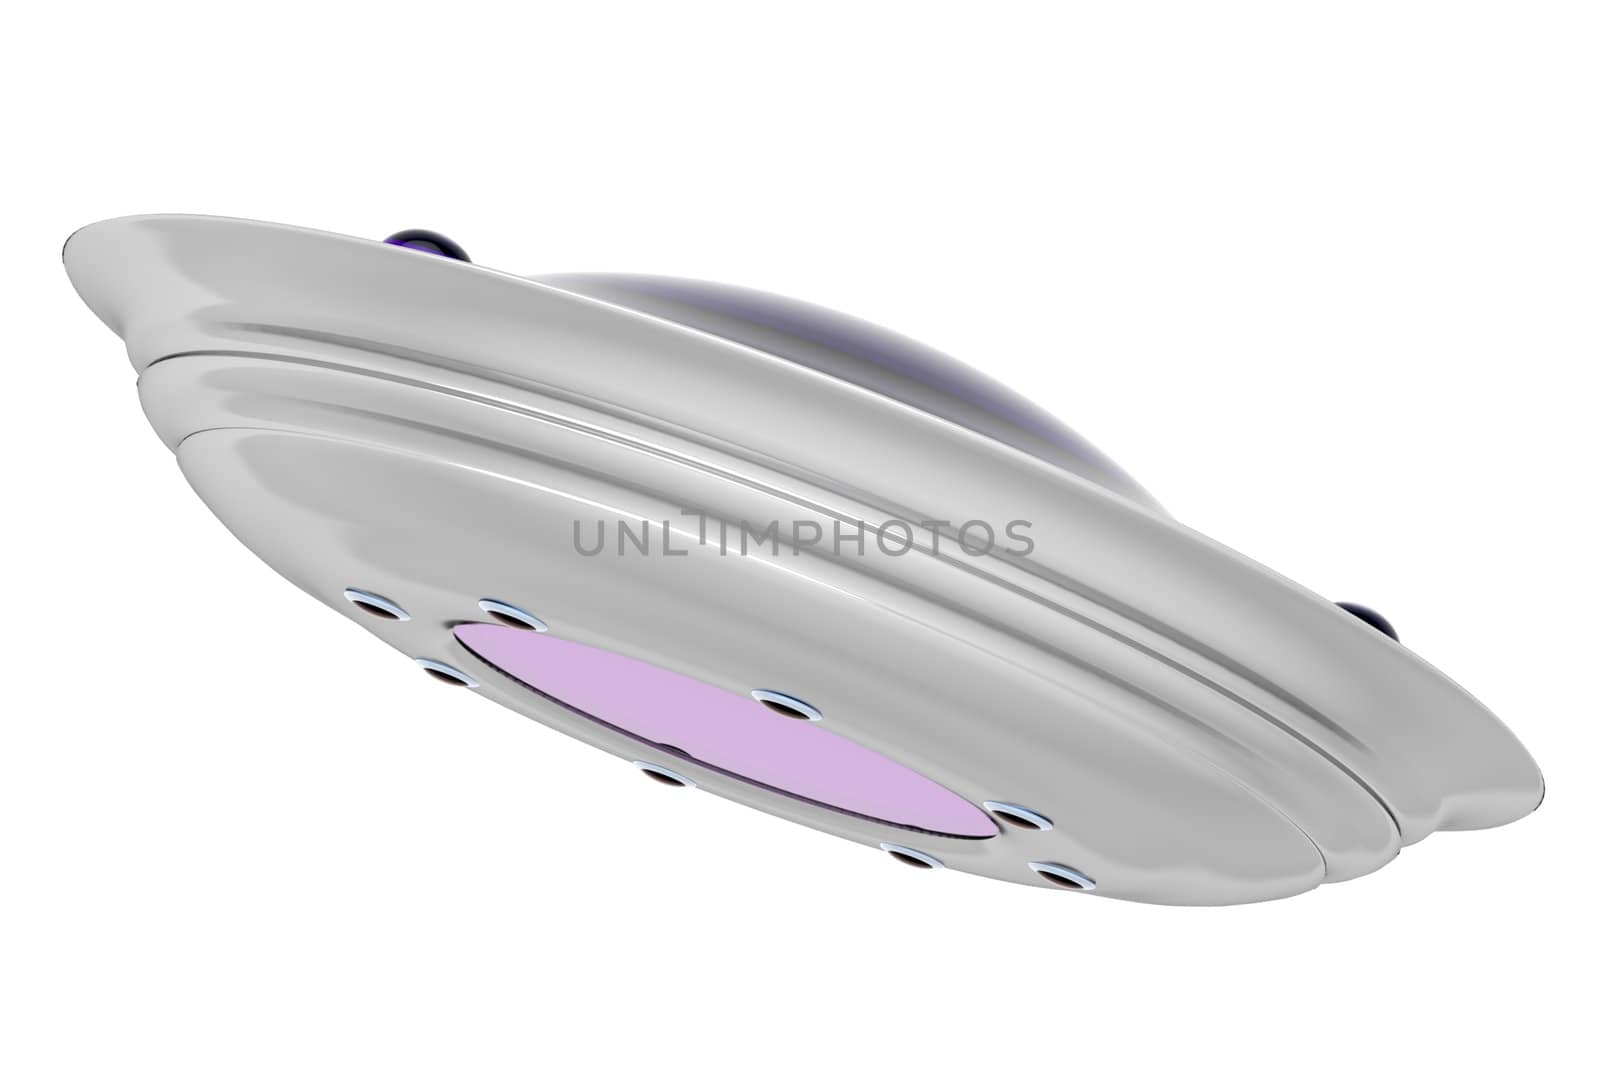 UFO isolated on white background - bottom view